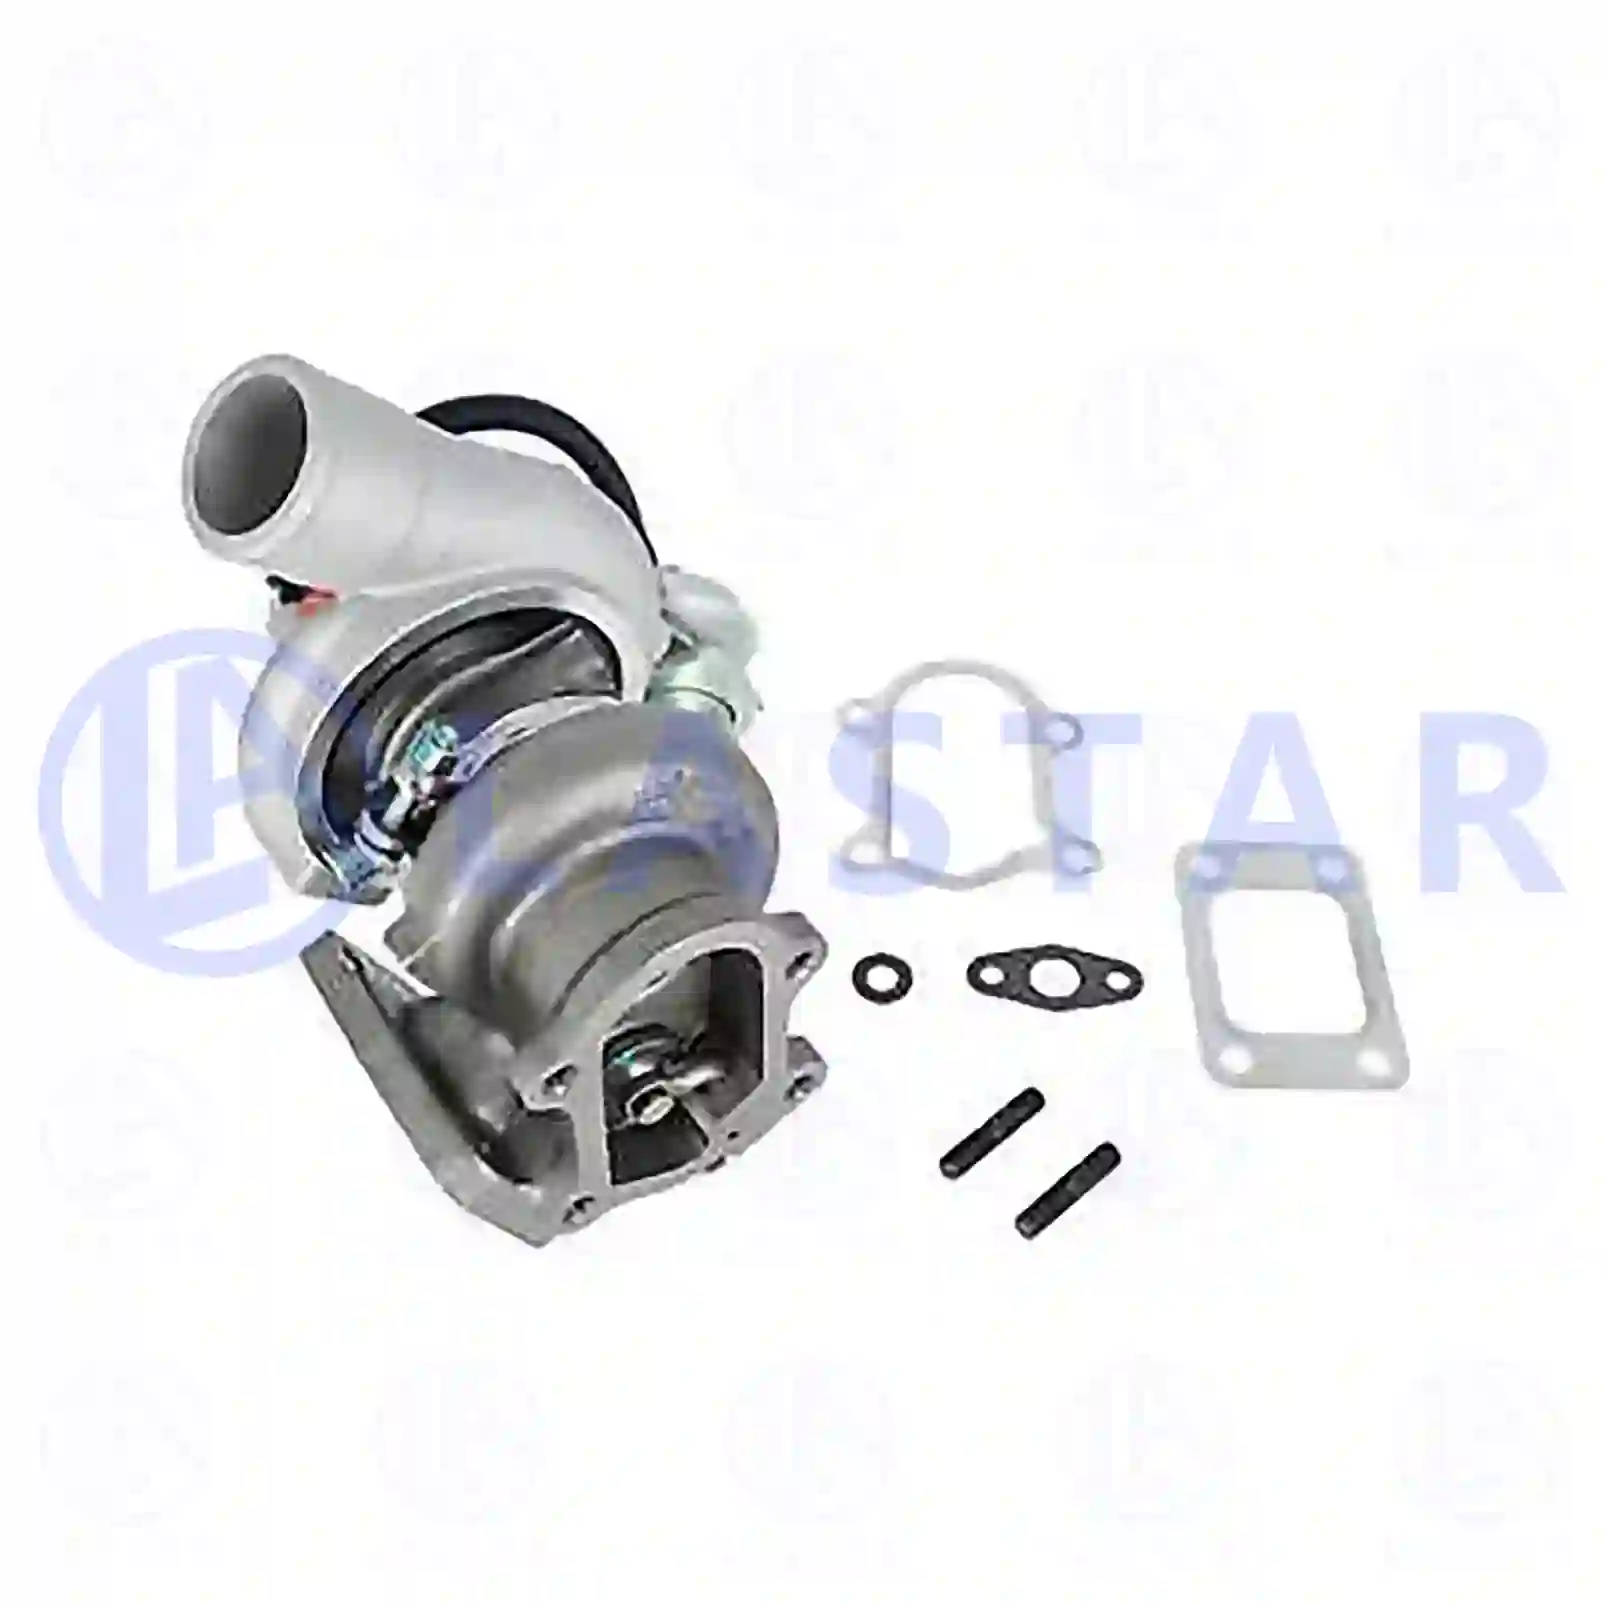 Turbocharger, with gasket kit, 77700404, 02998322, 02998324, 500054681, 500054682, 500335369, 500358190, 500372213, 500372214, 504071573, 504071574, 5001860076, 99462607, 99464734, 4937707000, 5001851014, 7485003129, 7485133962 ||  77700404 Lastar Spare Part | Truck Spare Parts, Auotomotive Spare Parts Turbocharger, with gasket kit, 77700404, 02998322, 02998324, 500054681, 500054682, 500335369, 500358190, 500372213, 500372214, 504071573, 504071574, 5001860076, 99462607, 99464734, 4937707000, 5001851014, 7485003129, 7485133962 ||  77700404 Lastar Spare Part | Truck Spare Parts, Auotomotive Spare Parts